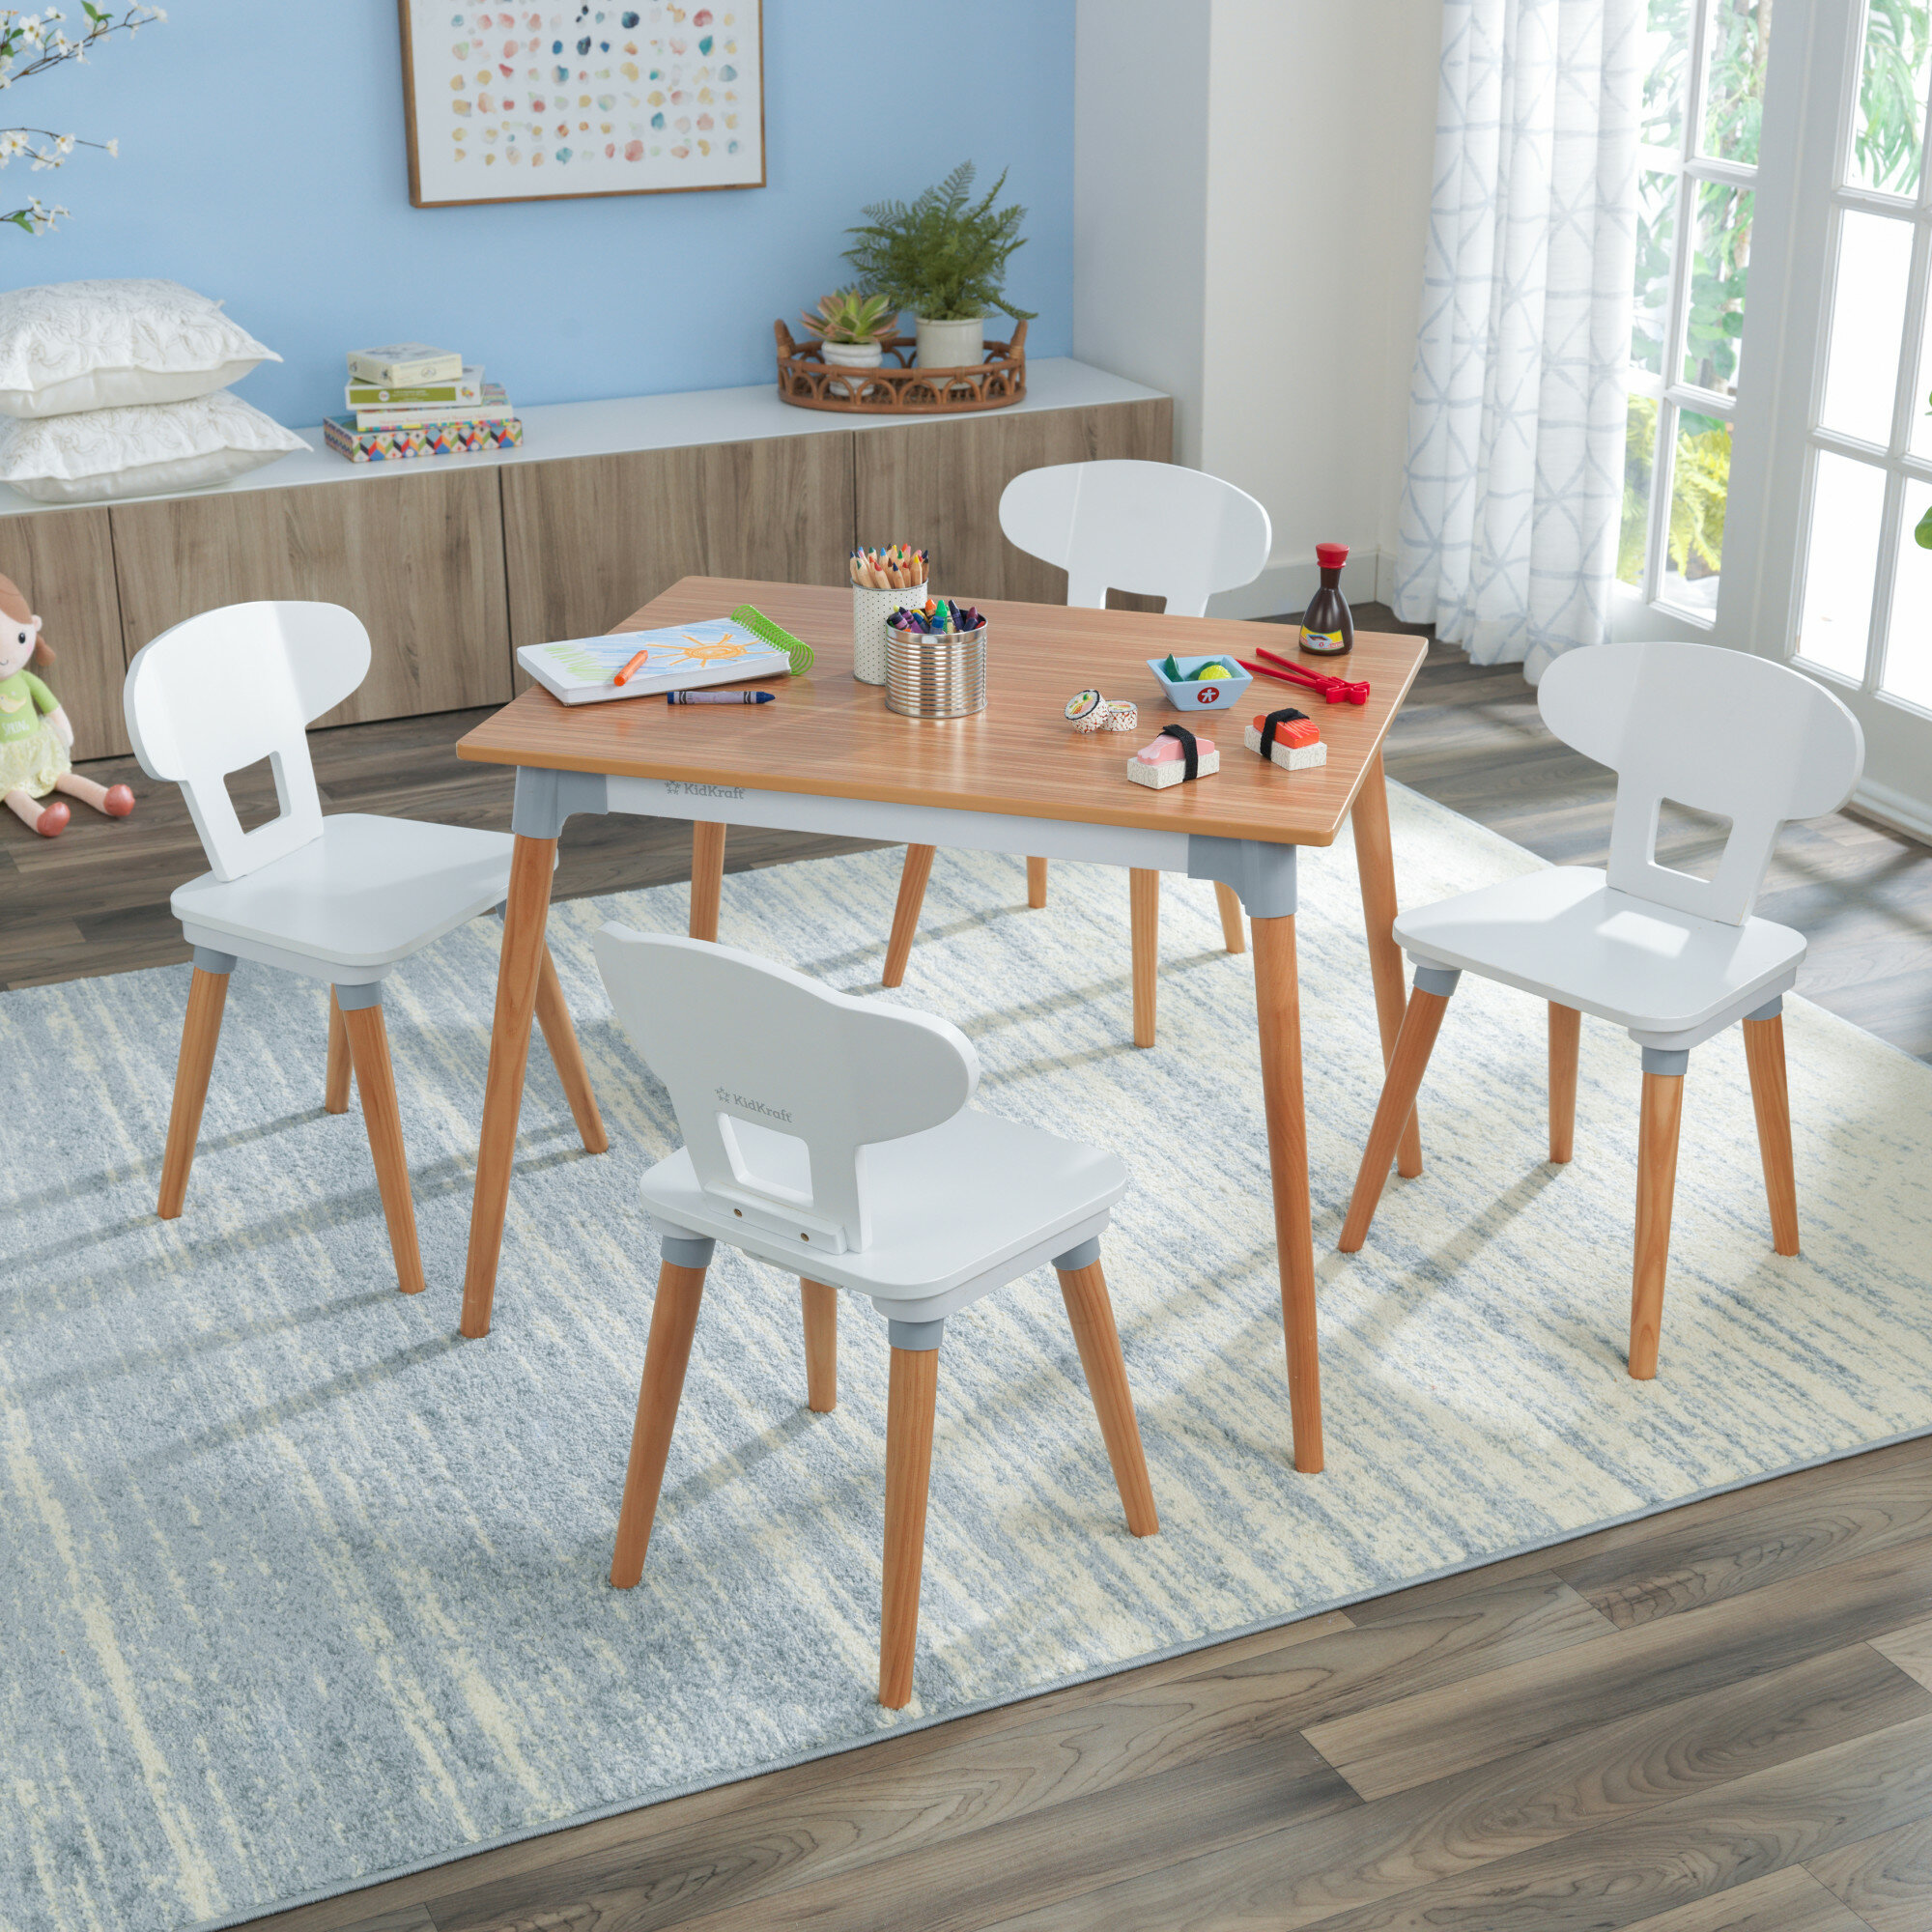 Solid Wood Highlighter Table and 4 Chair Set by KidKraft 